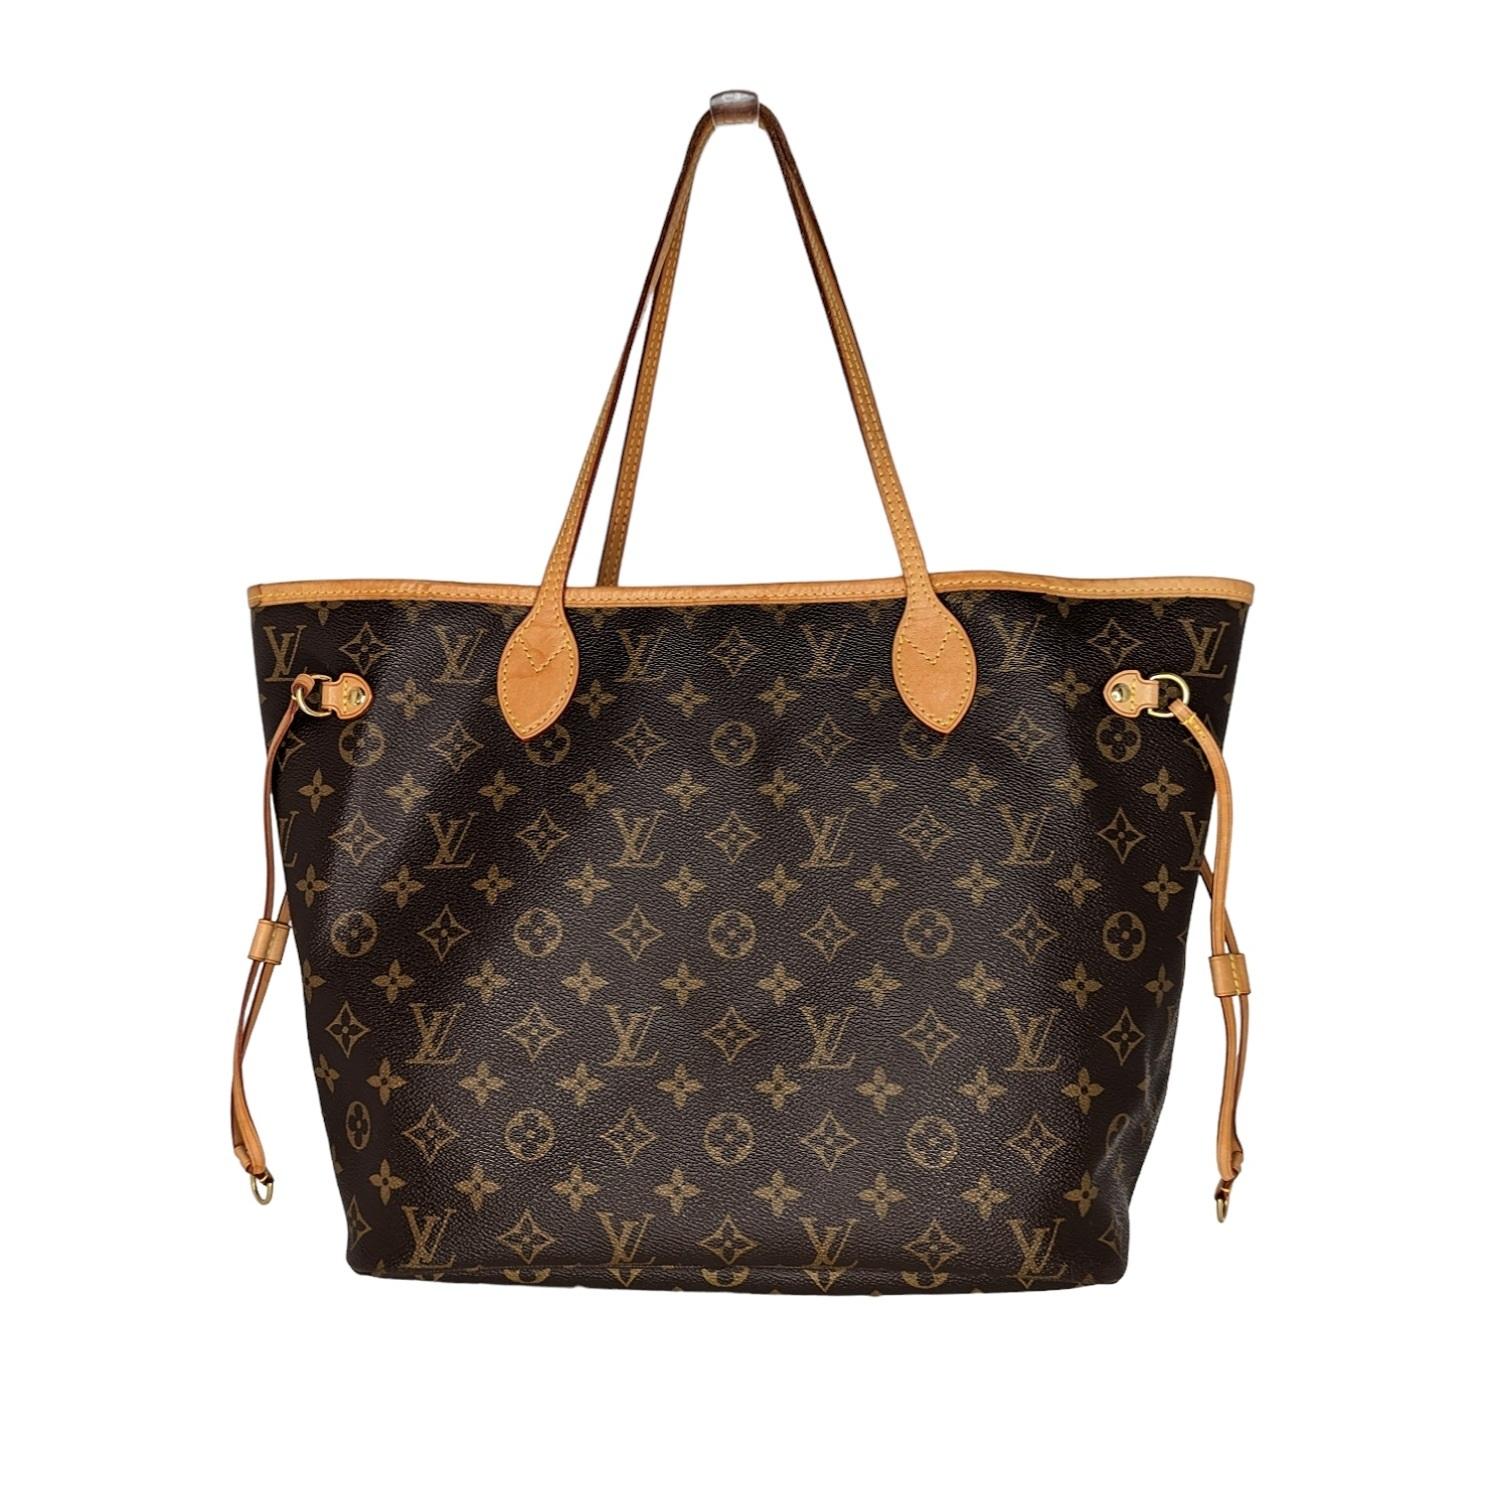 This stylish tote is crafted of classic Louis Vuitton monogram on coated canvas. It features vachetta cowhide leather trim, shoulder straps, and side cinch cords. The top is open to a beige fabric interior with a hanging zipper pocket. Retail price